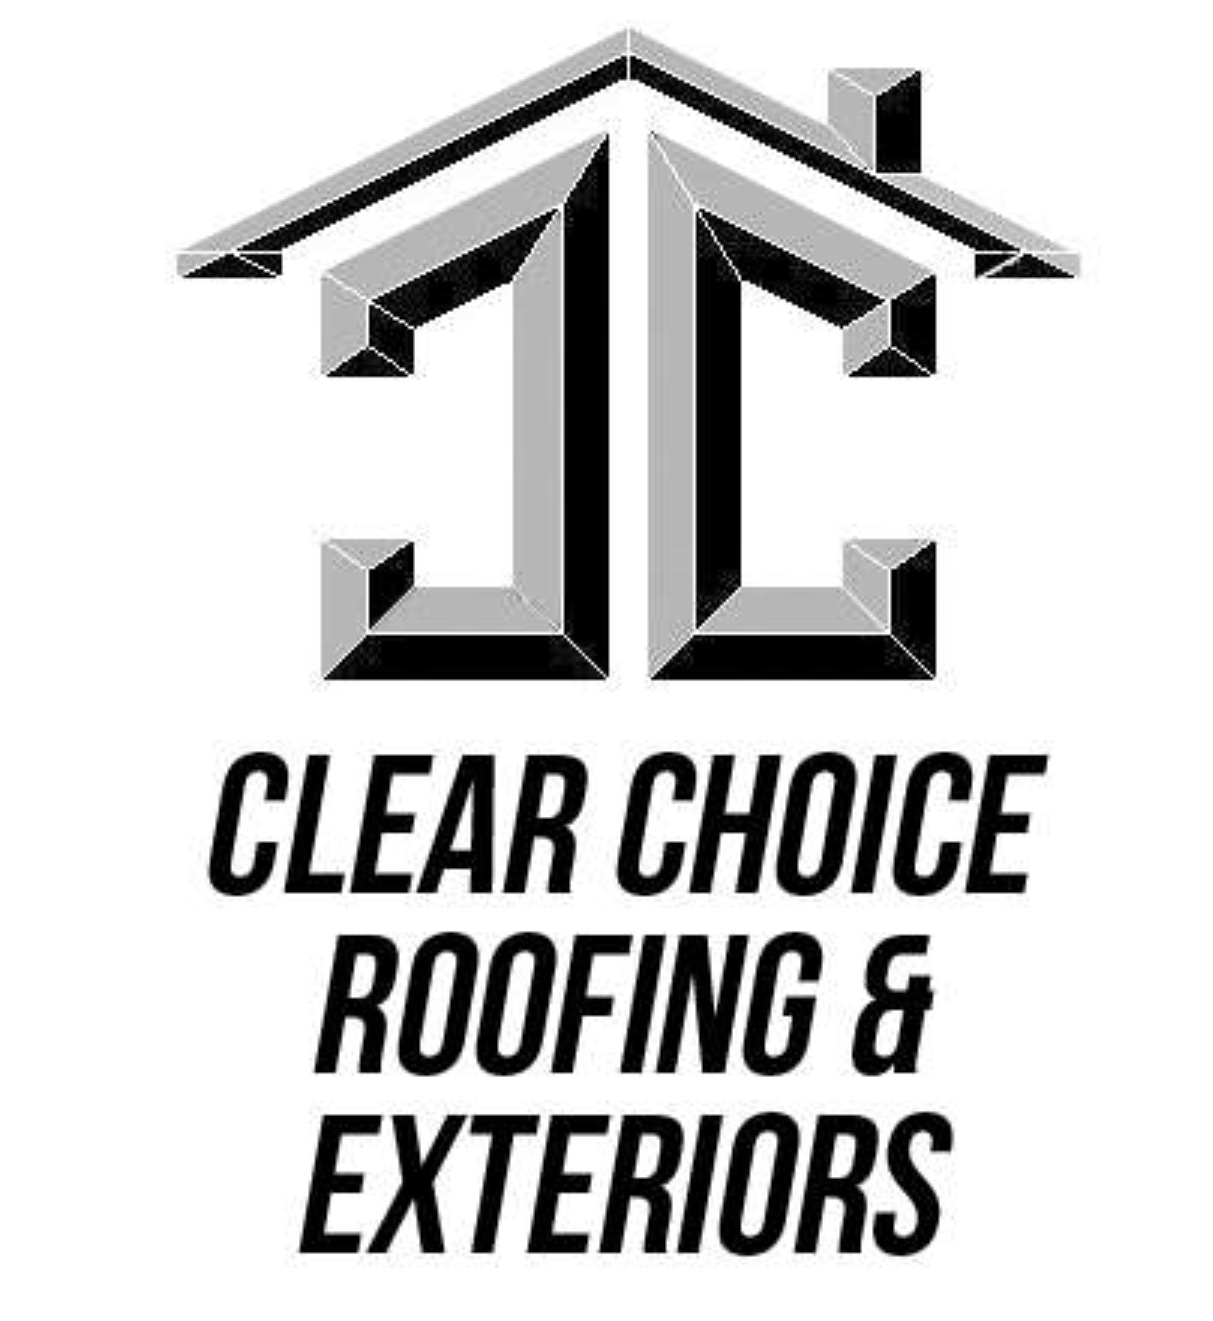 Clearchoice roofing and exteriors